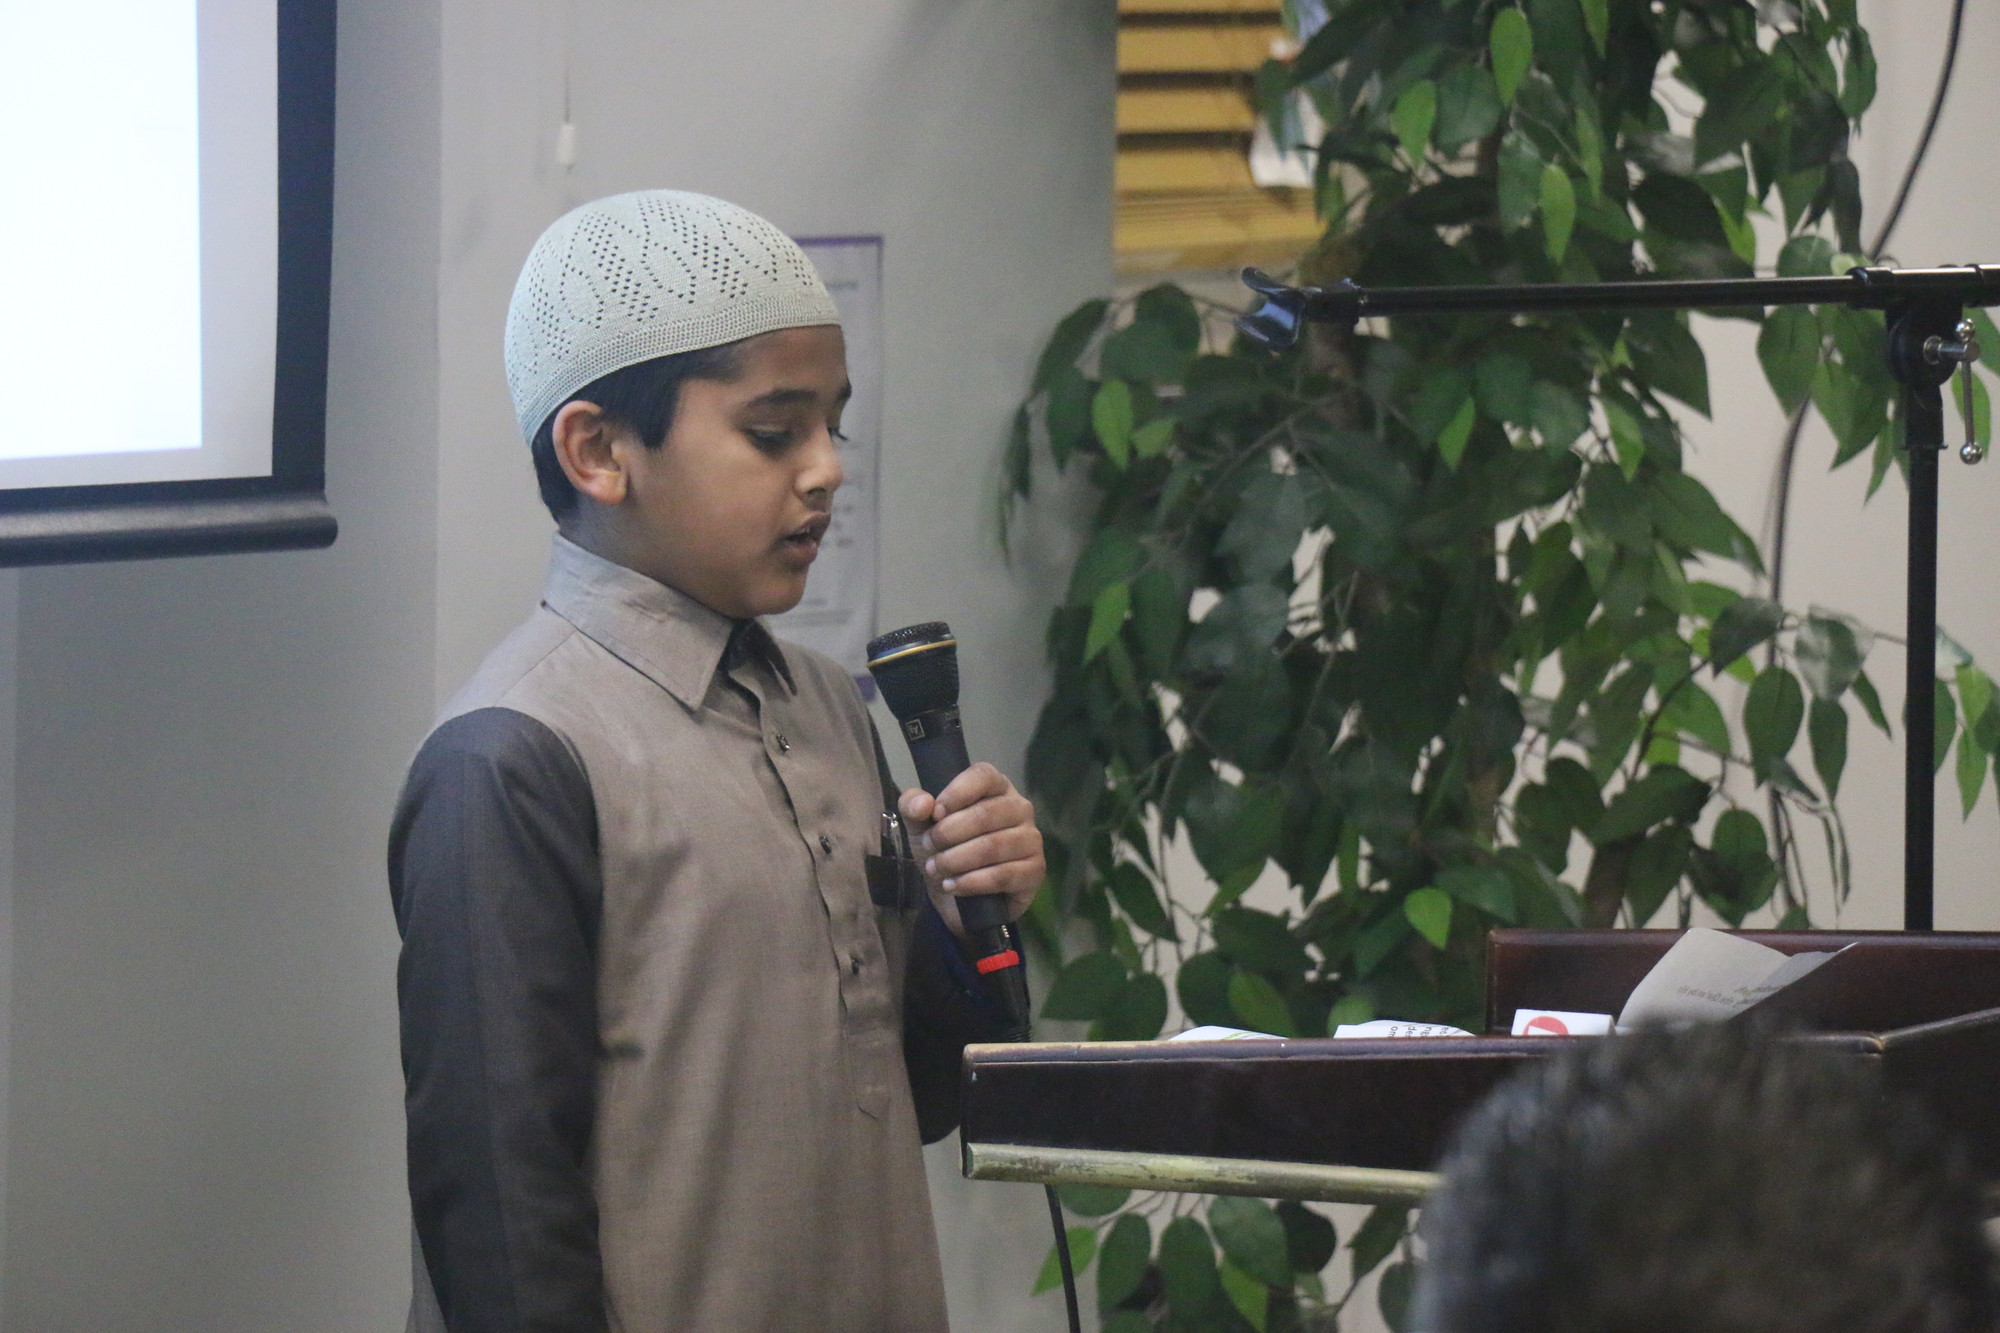 Zaid Kapadia, 12, at left, recited a verse from the Quran.